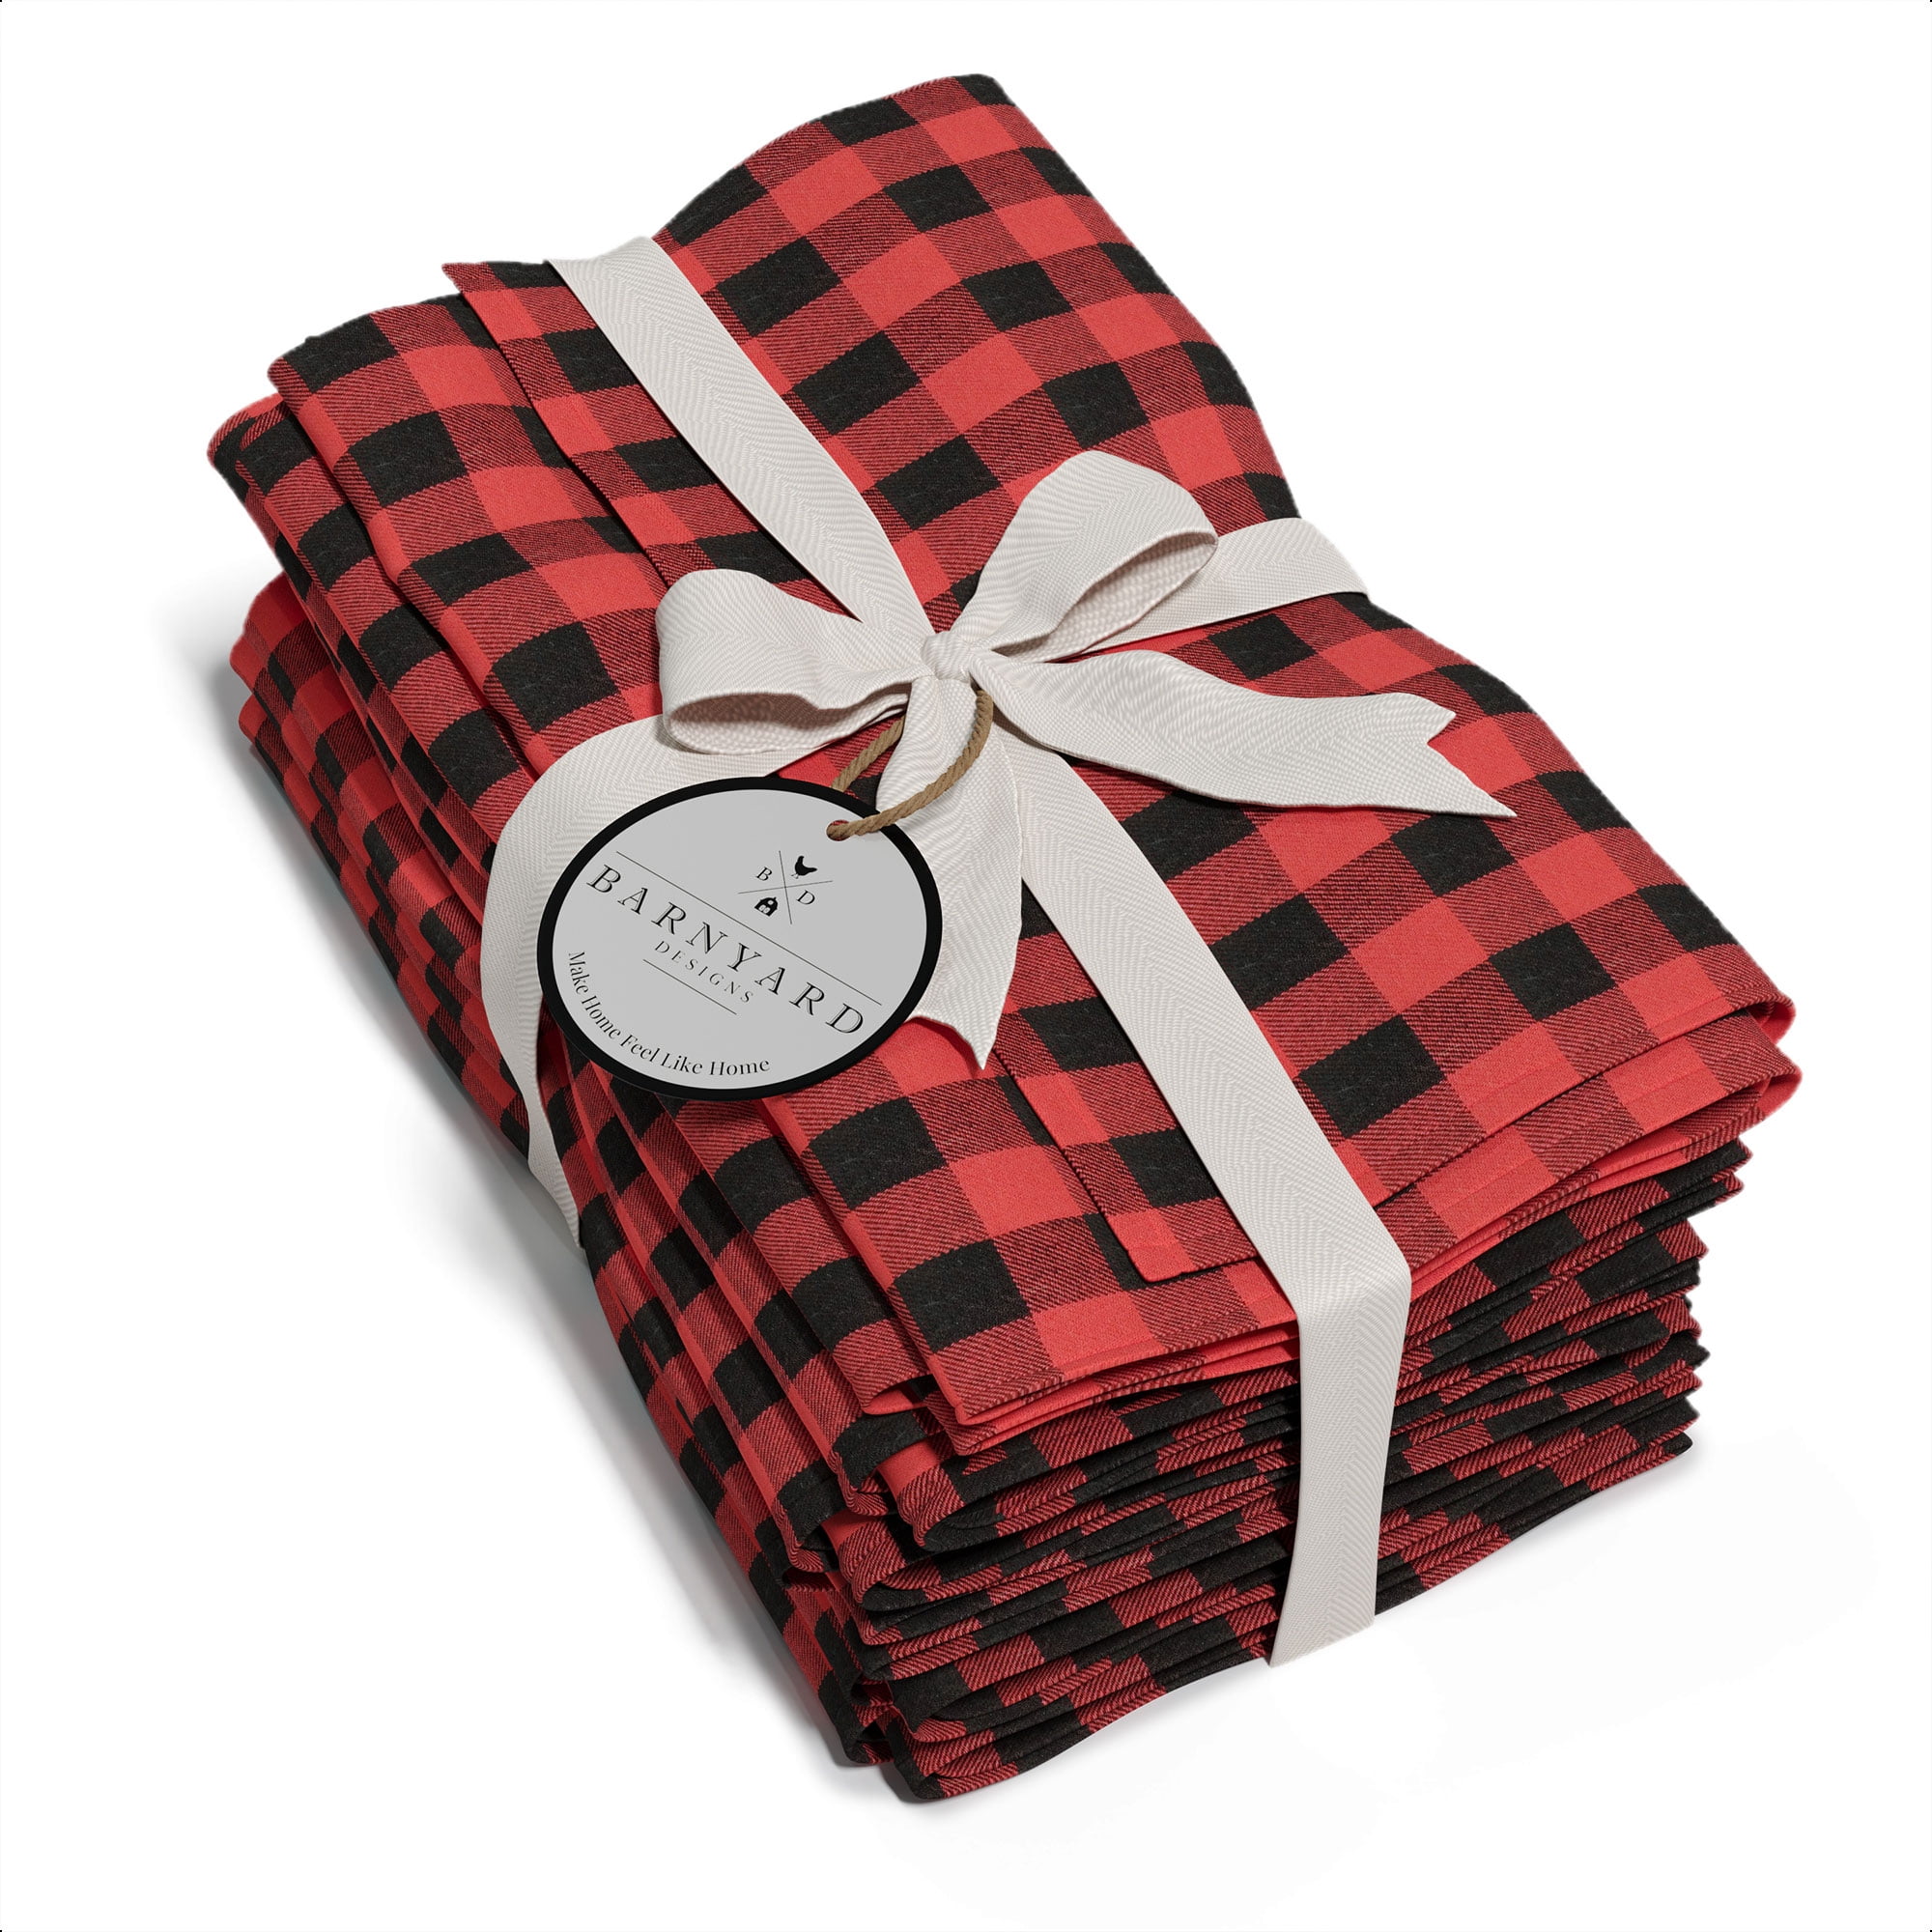 Cocktail Napkins Paper Linen Napkins with Feel of Cloth Napkins Red Gingham Country Rustic Party Napkins 5 x 5 Pack of 20